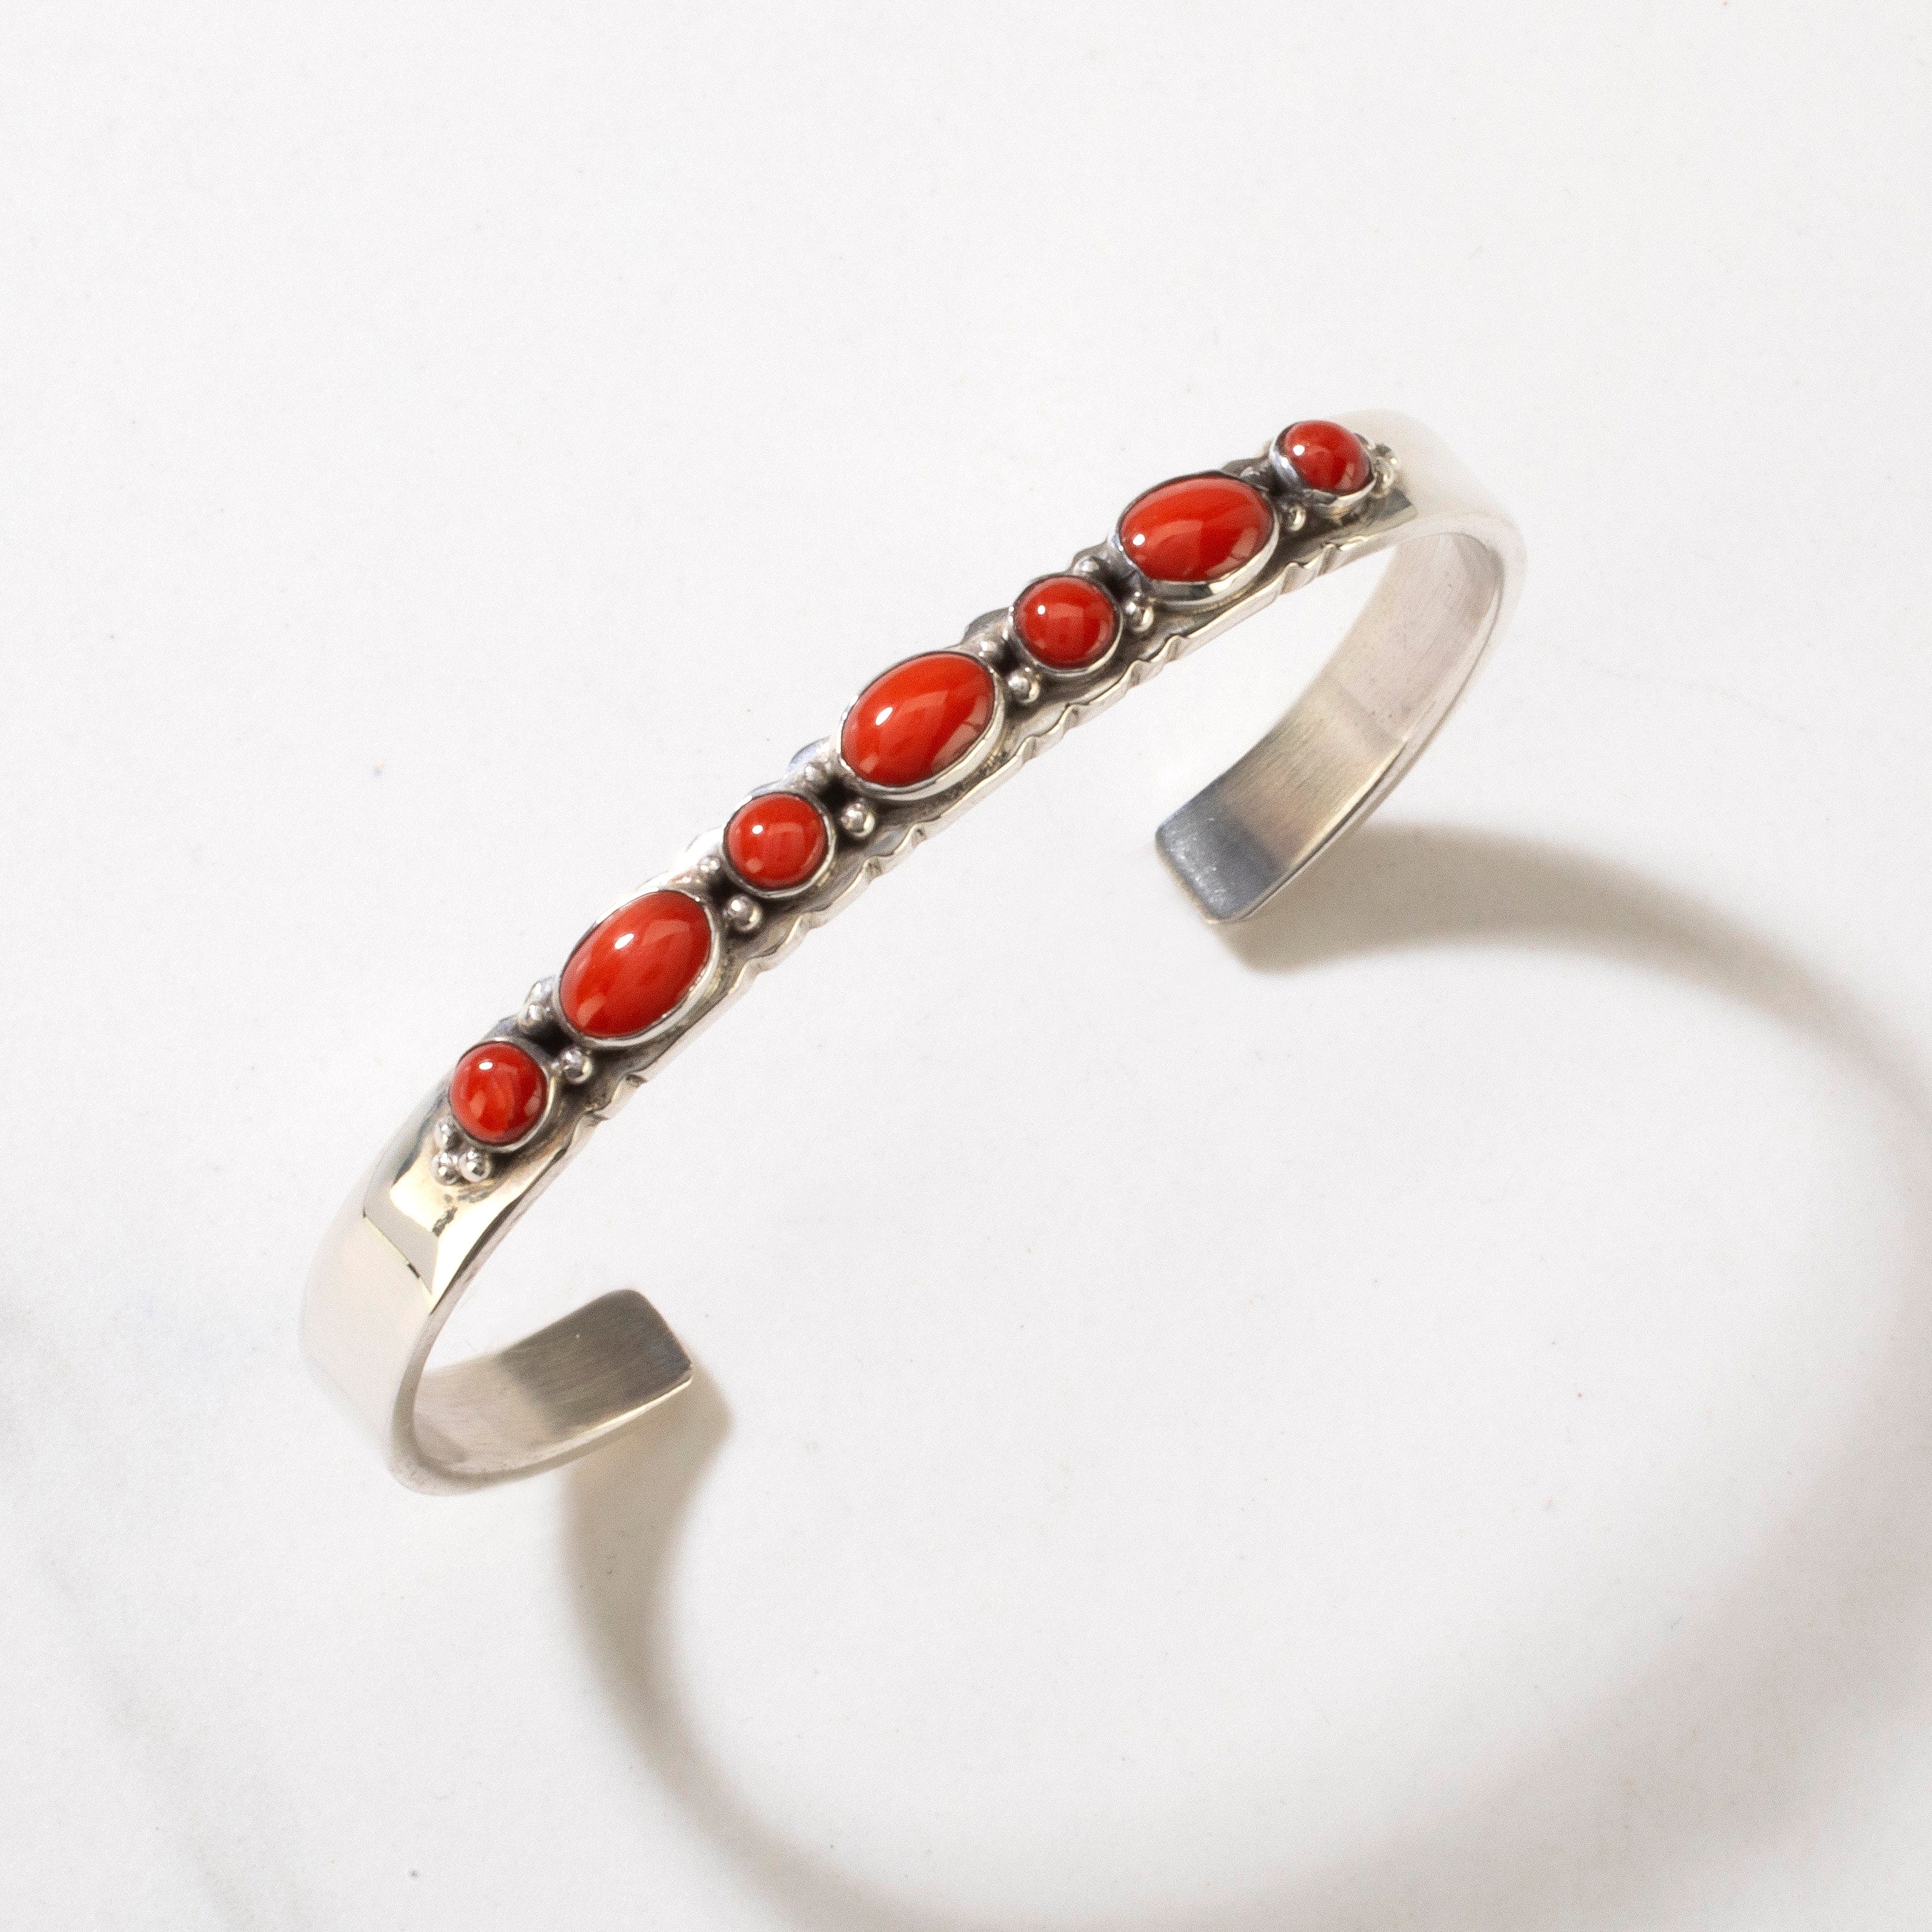 Kalifano Native American Jewelry Gabriel Yazzie Red Coral Navajo USA Native American Made 925 Sterling Silver Cuff NAB900.019